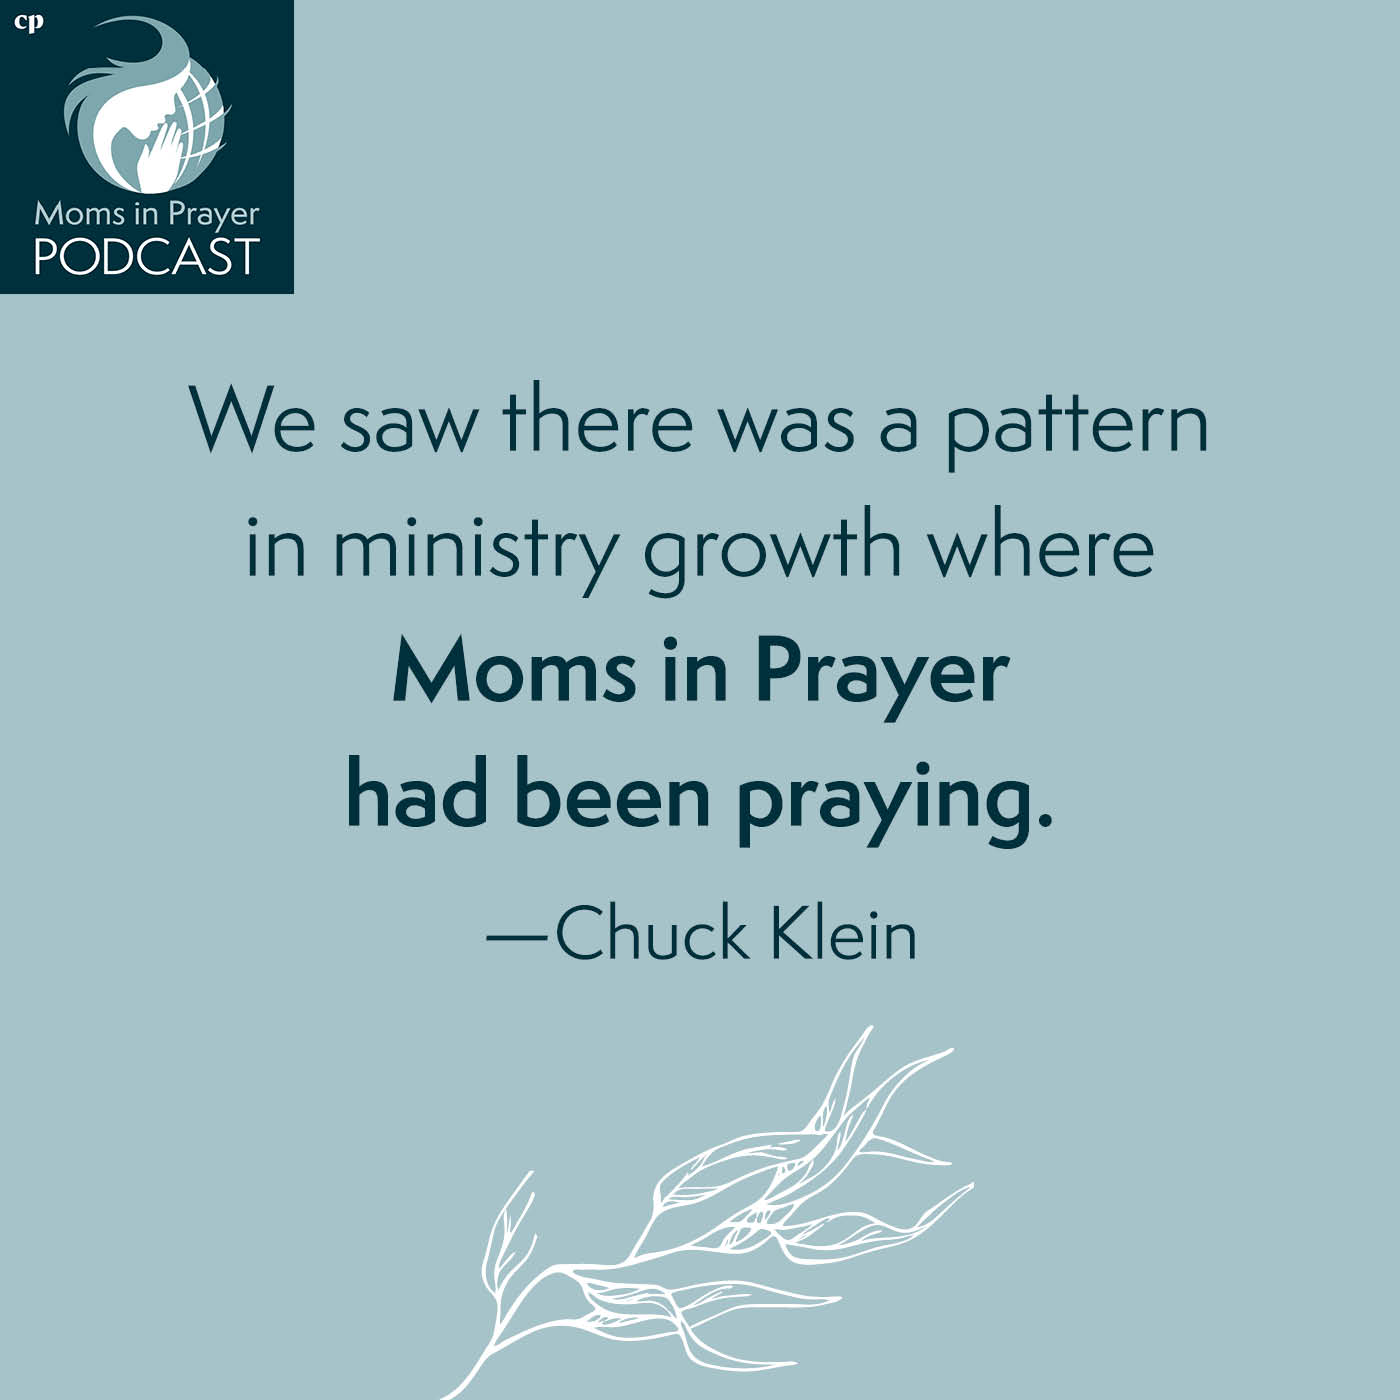 Campus Alliance Moms in Prayer ministry growth